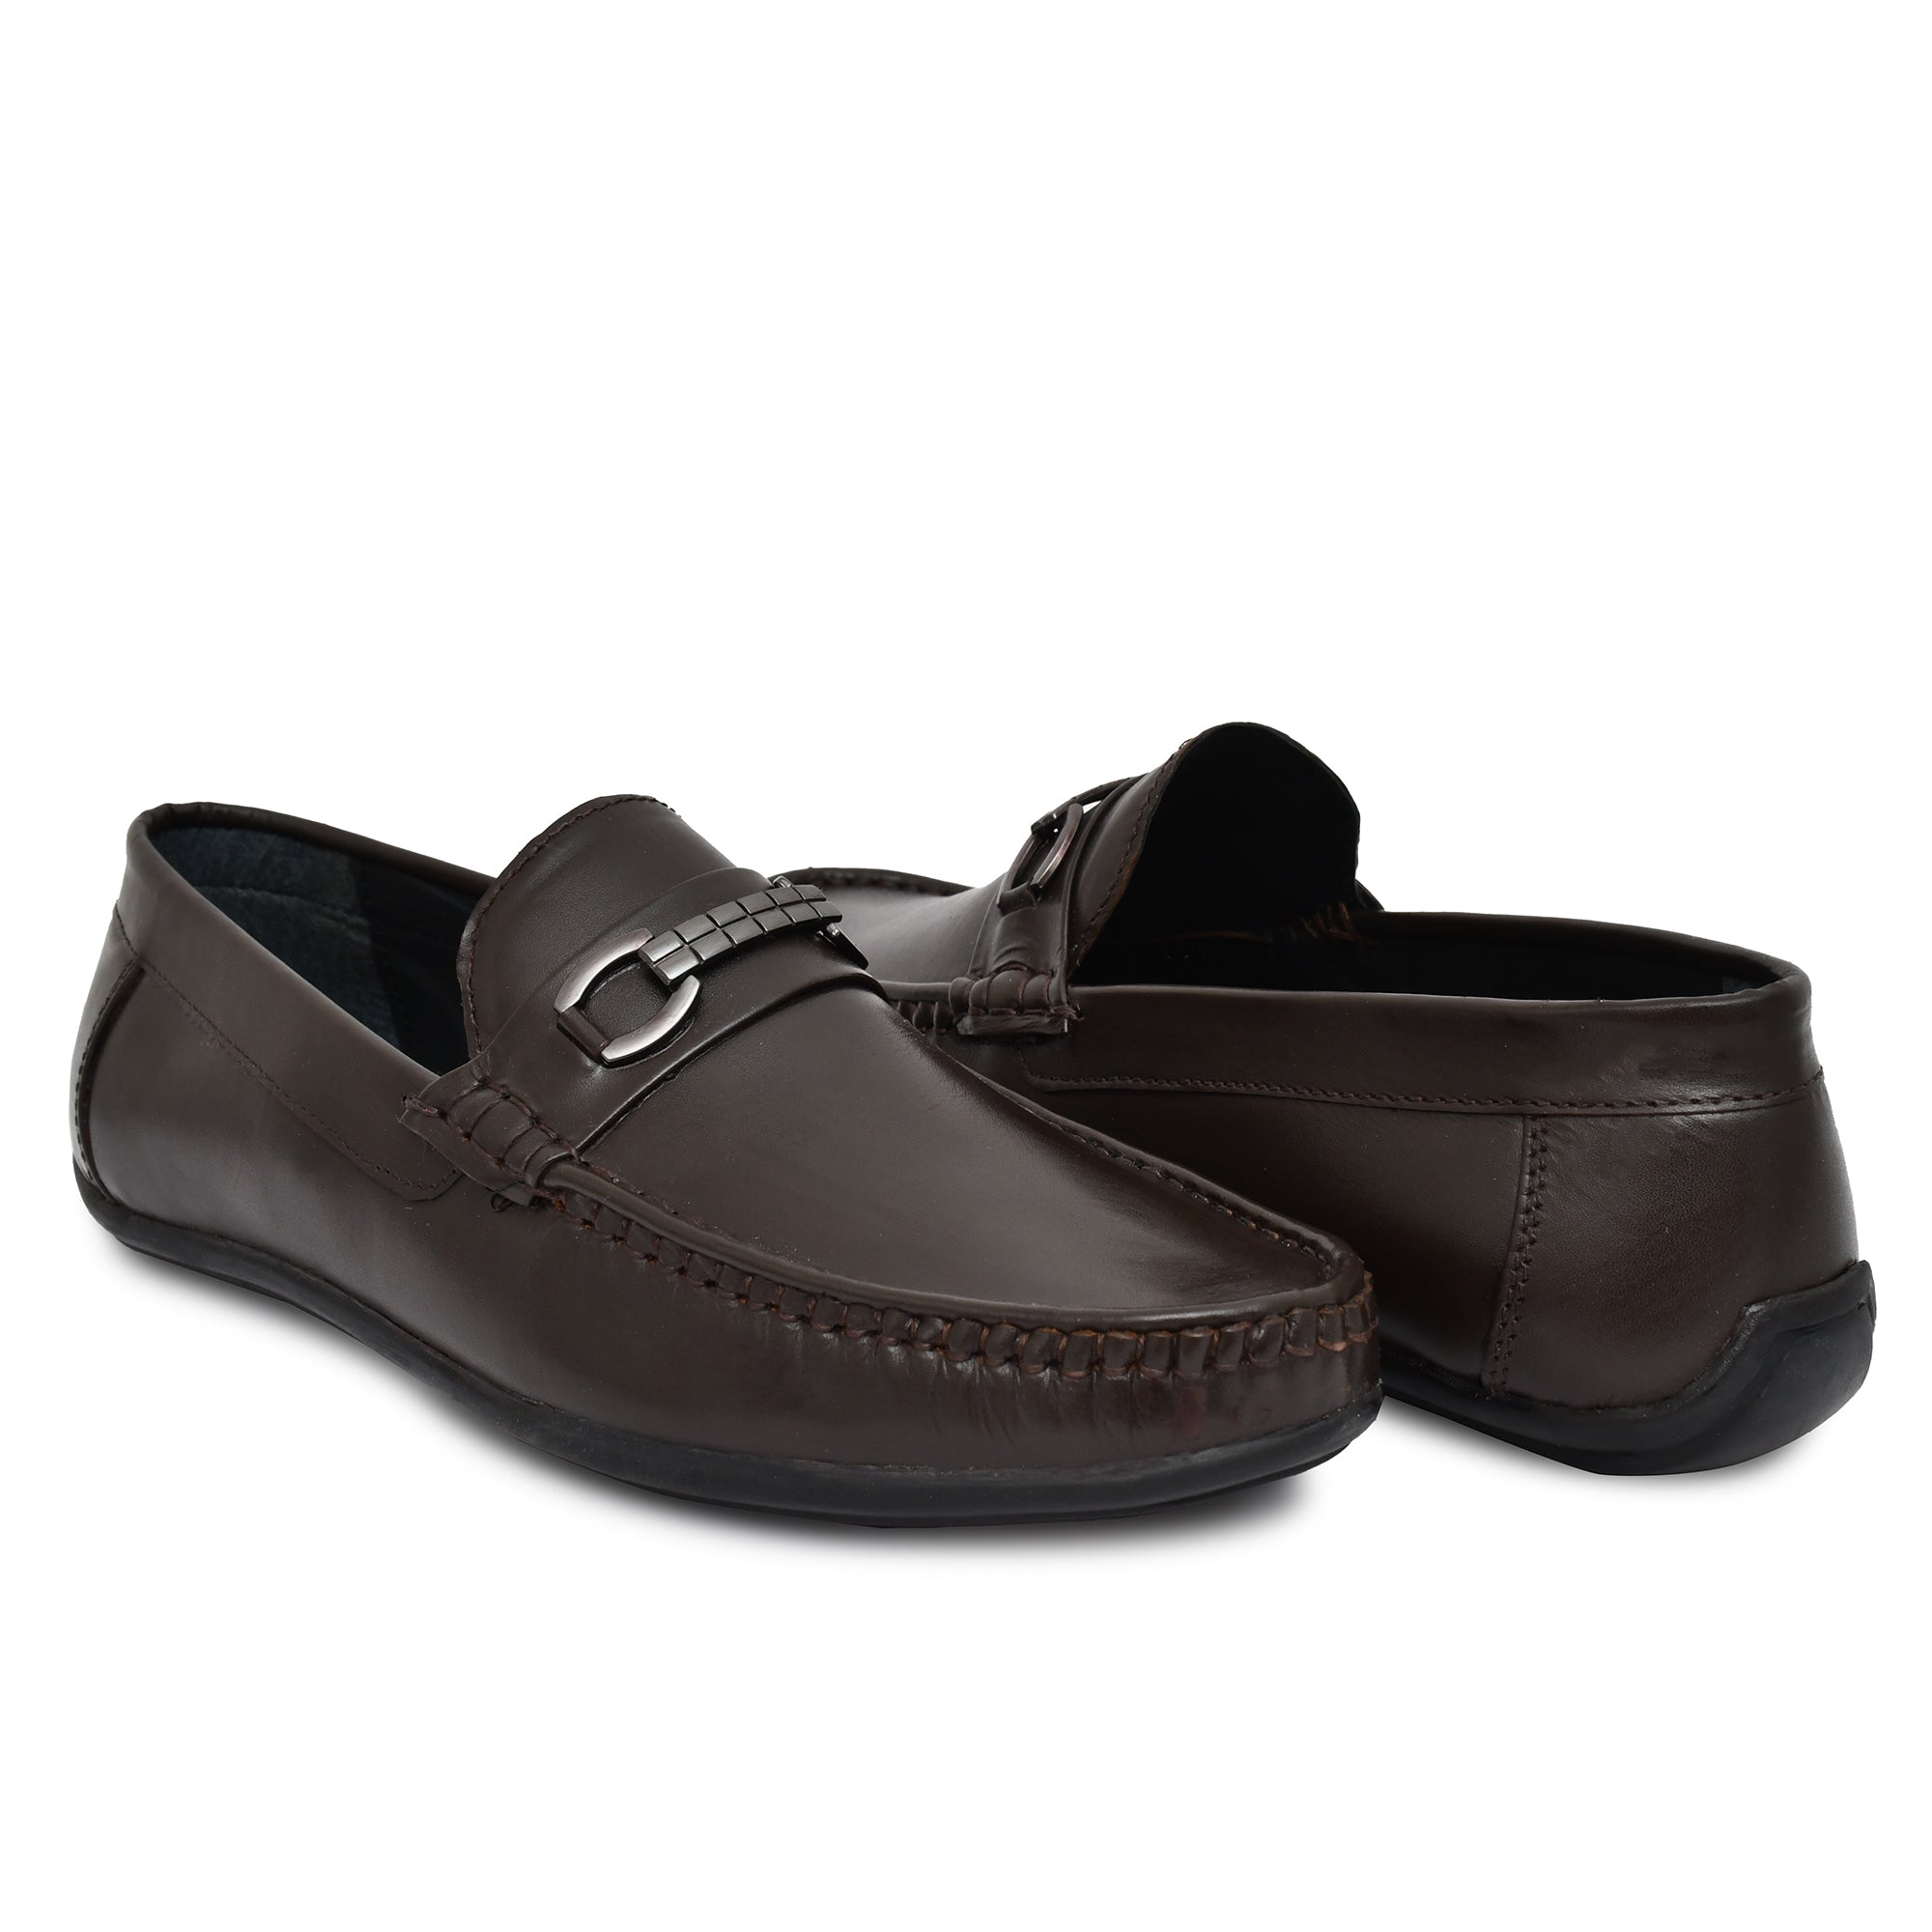 Luxury Buckled Leather Loafers for men's countrymaddox